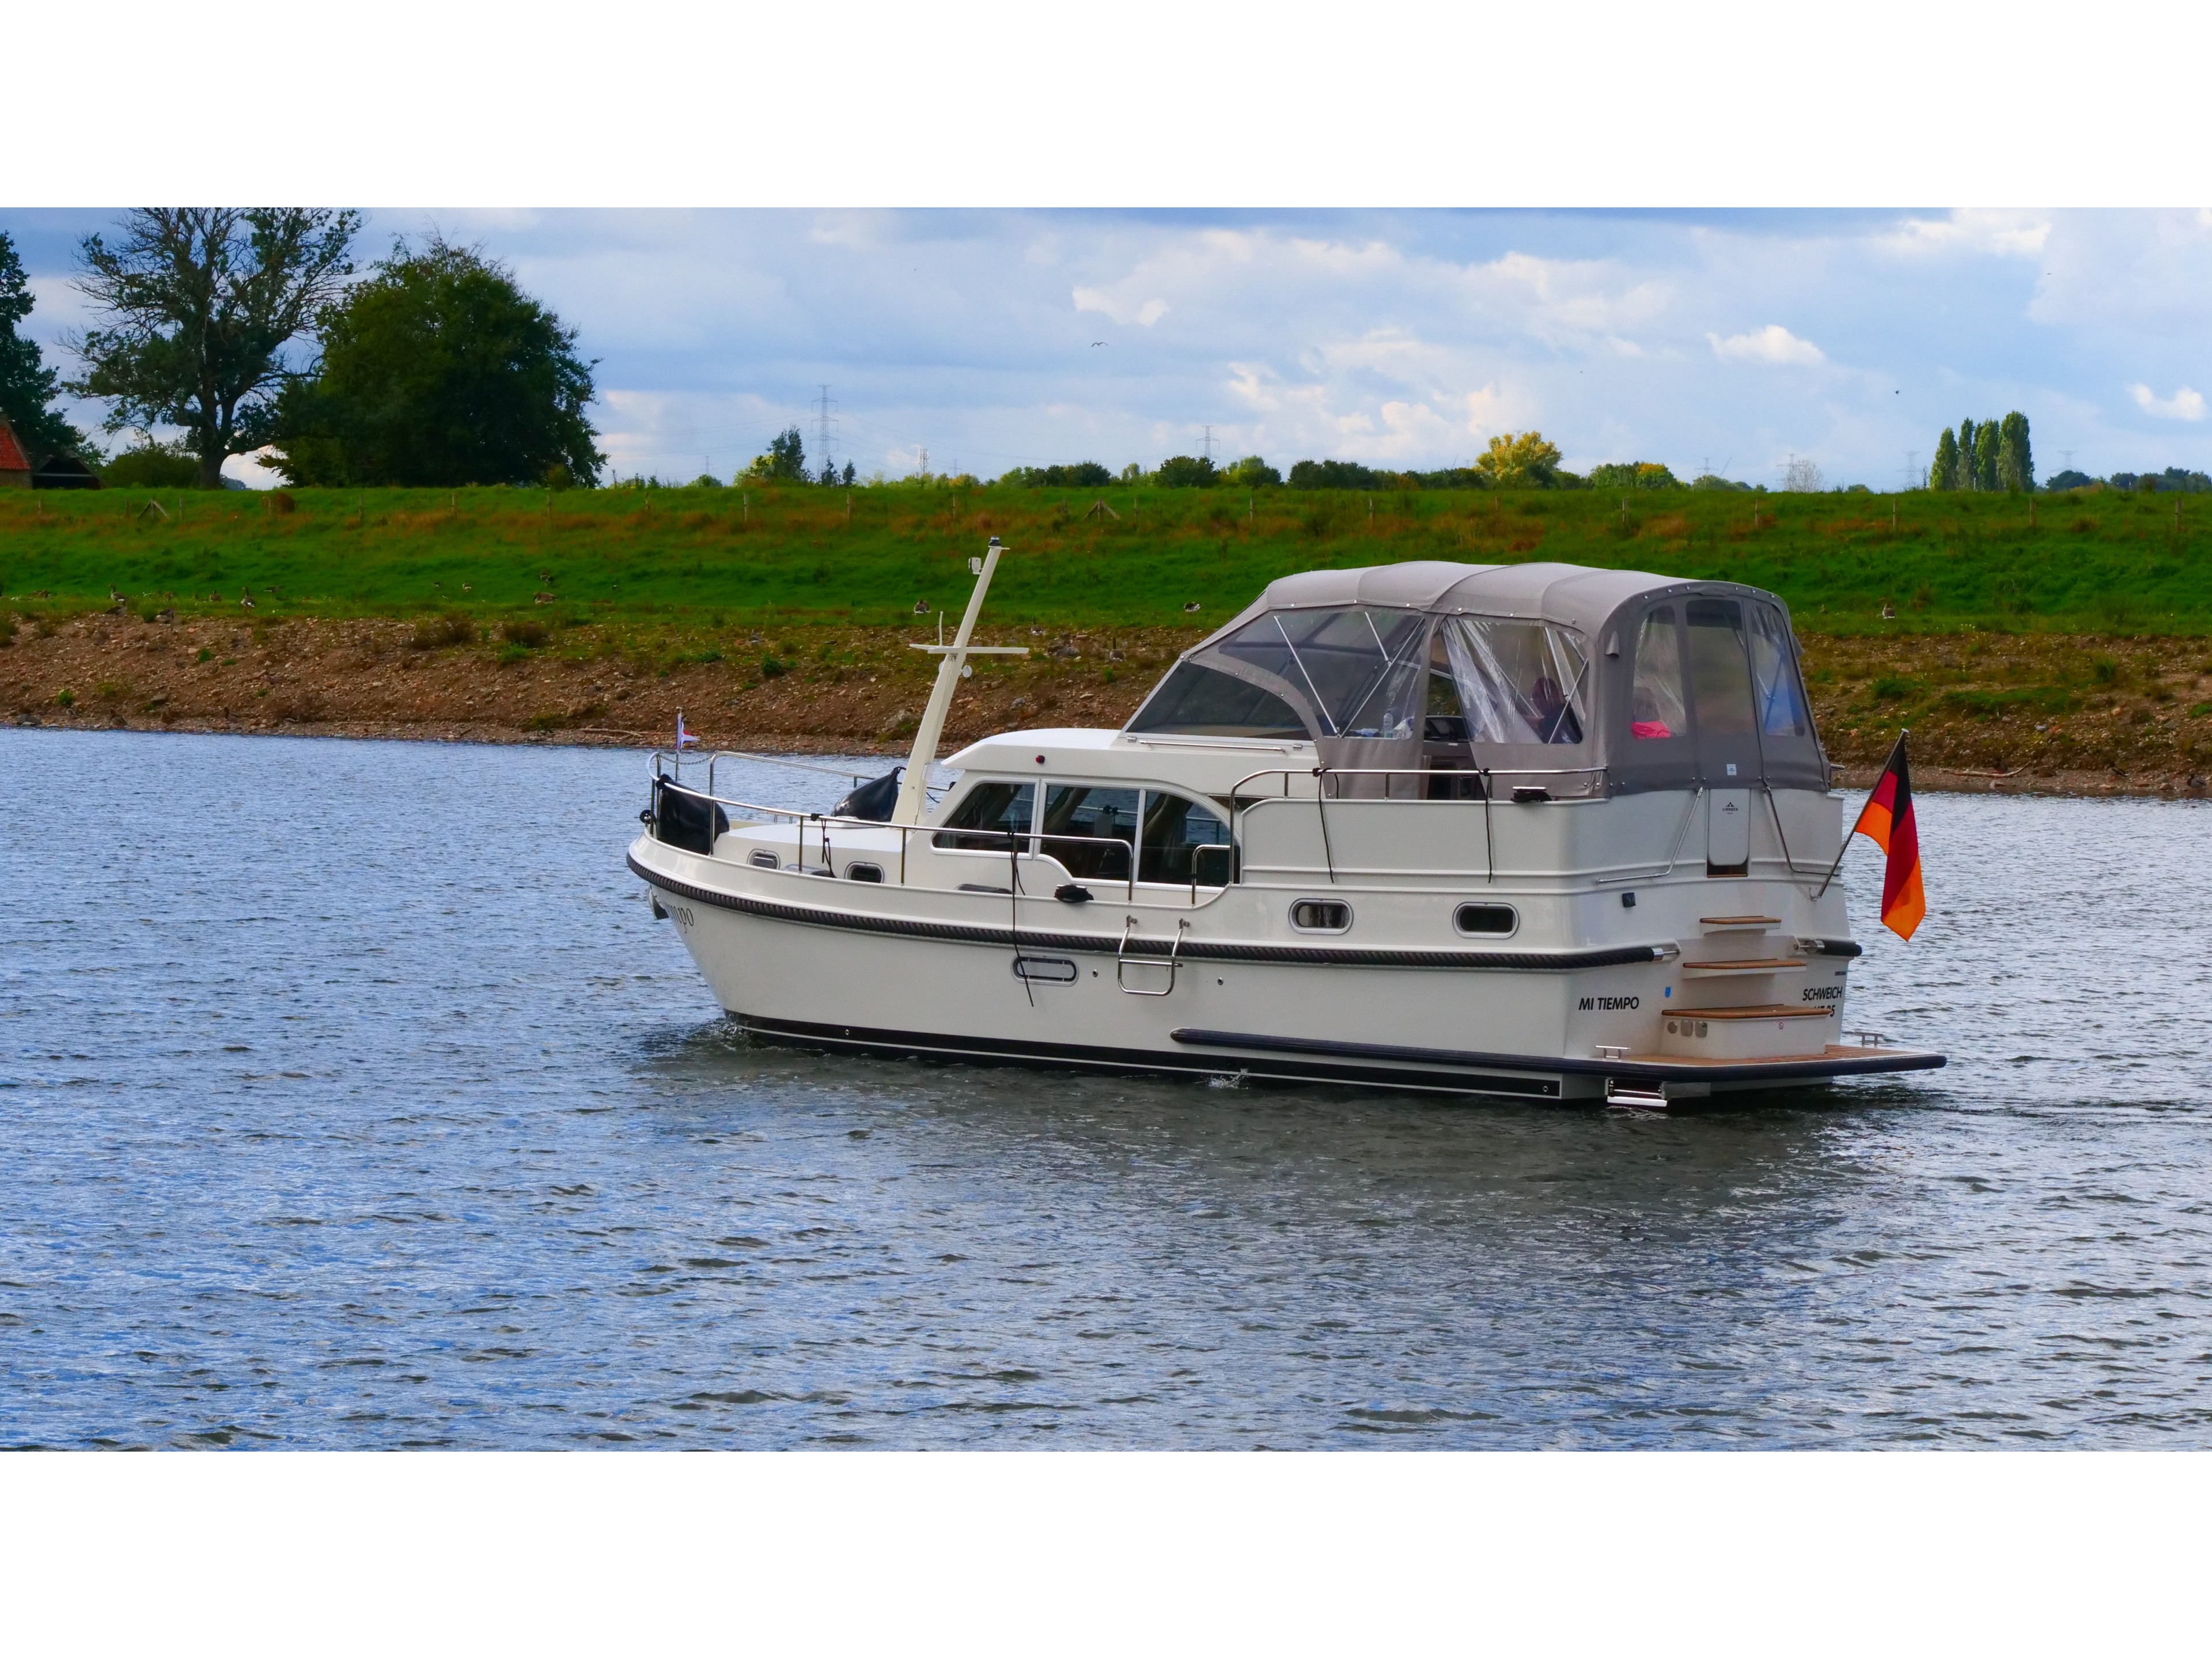 Linssen Grand Sturdy 35.0 AC - Motor Boat Charter Germany & Boat hire in Germany Mirow Jachthafen Mirow 2